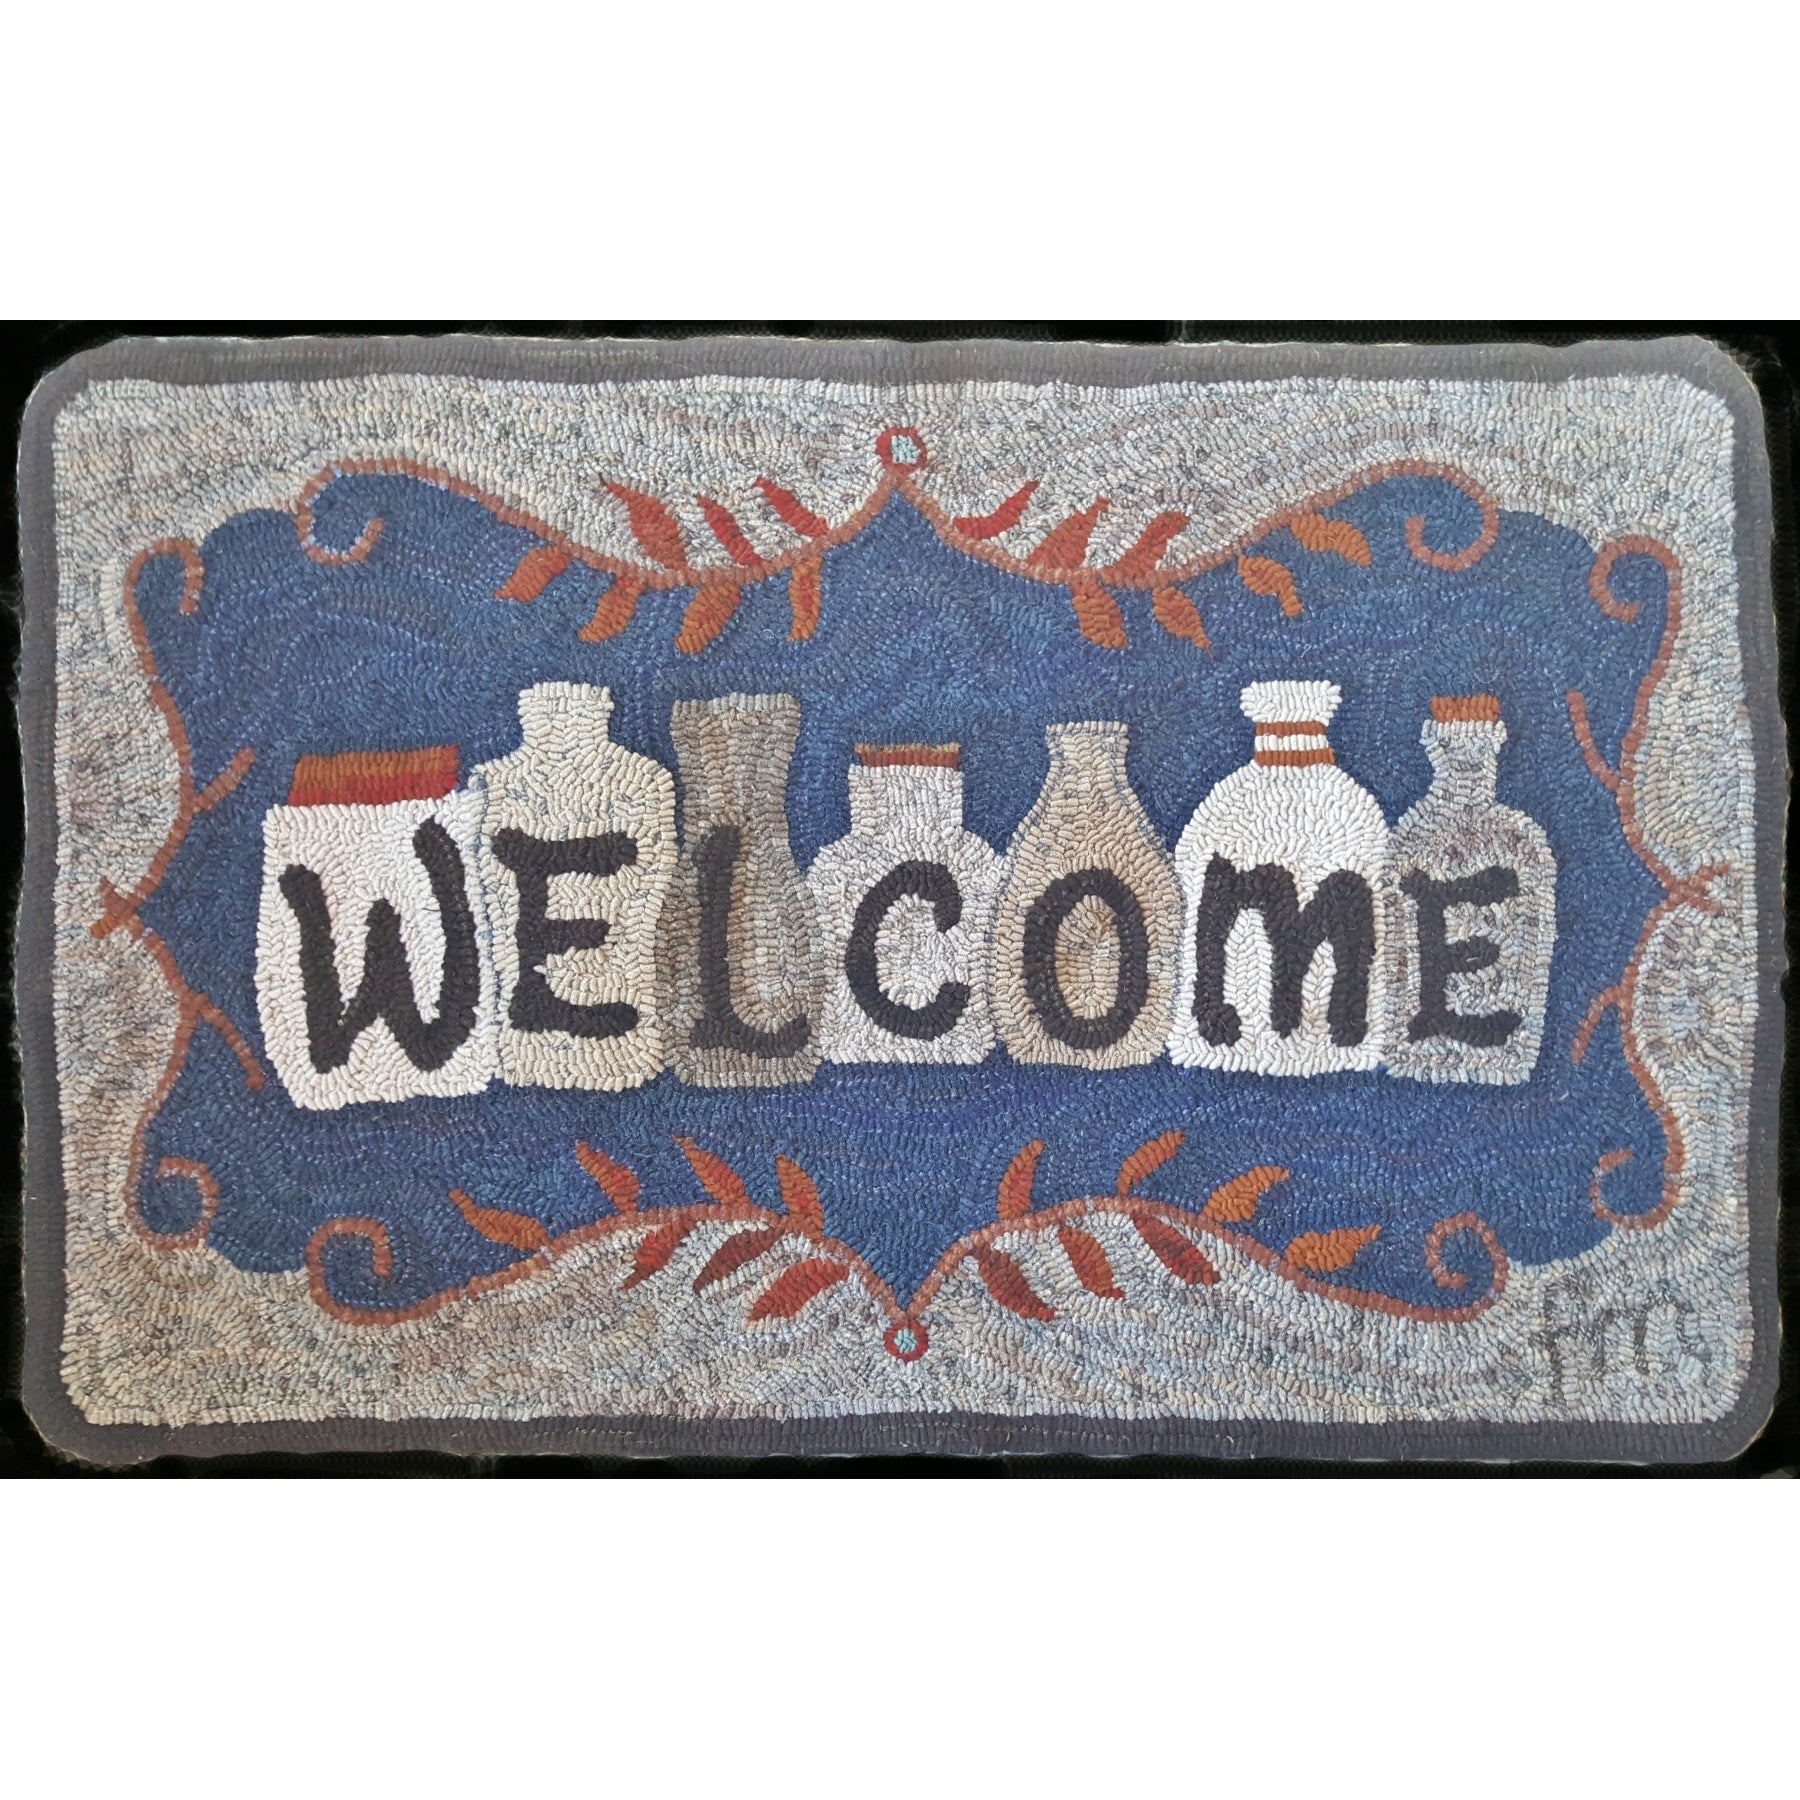 Welcome Jars, rug hooked by Fritz Mitnick